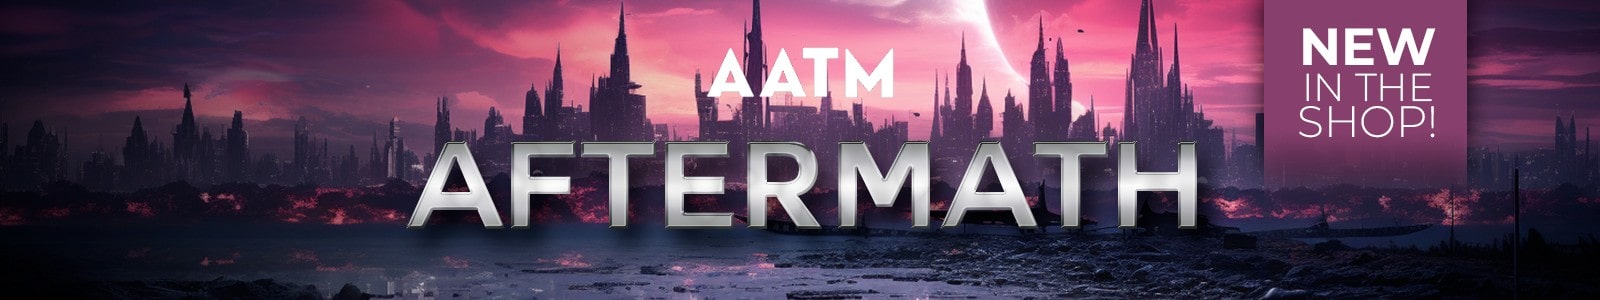 AFTERMATH by All About Trailer Music